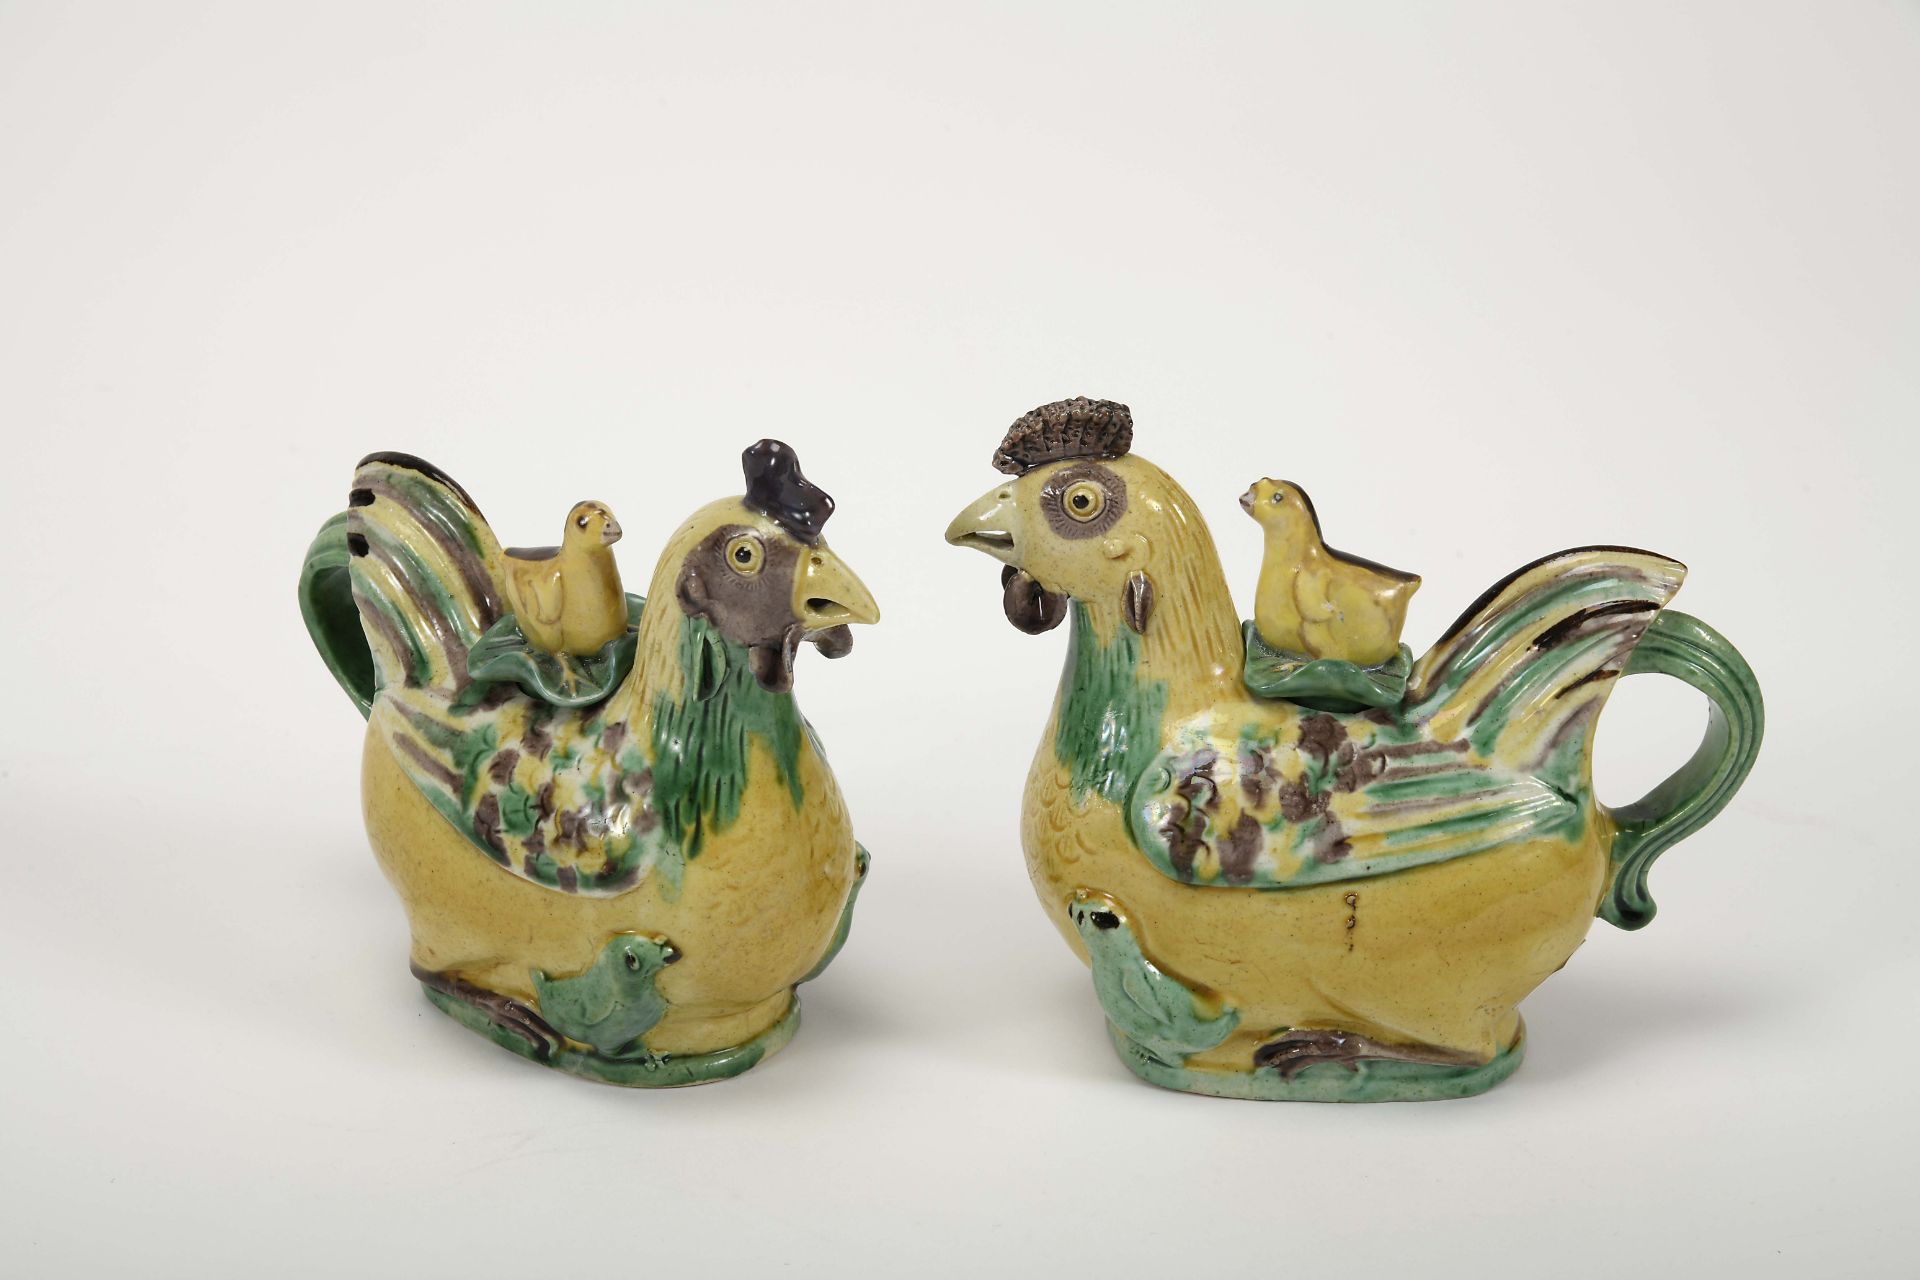 A pair of "Chicken" teapots